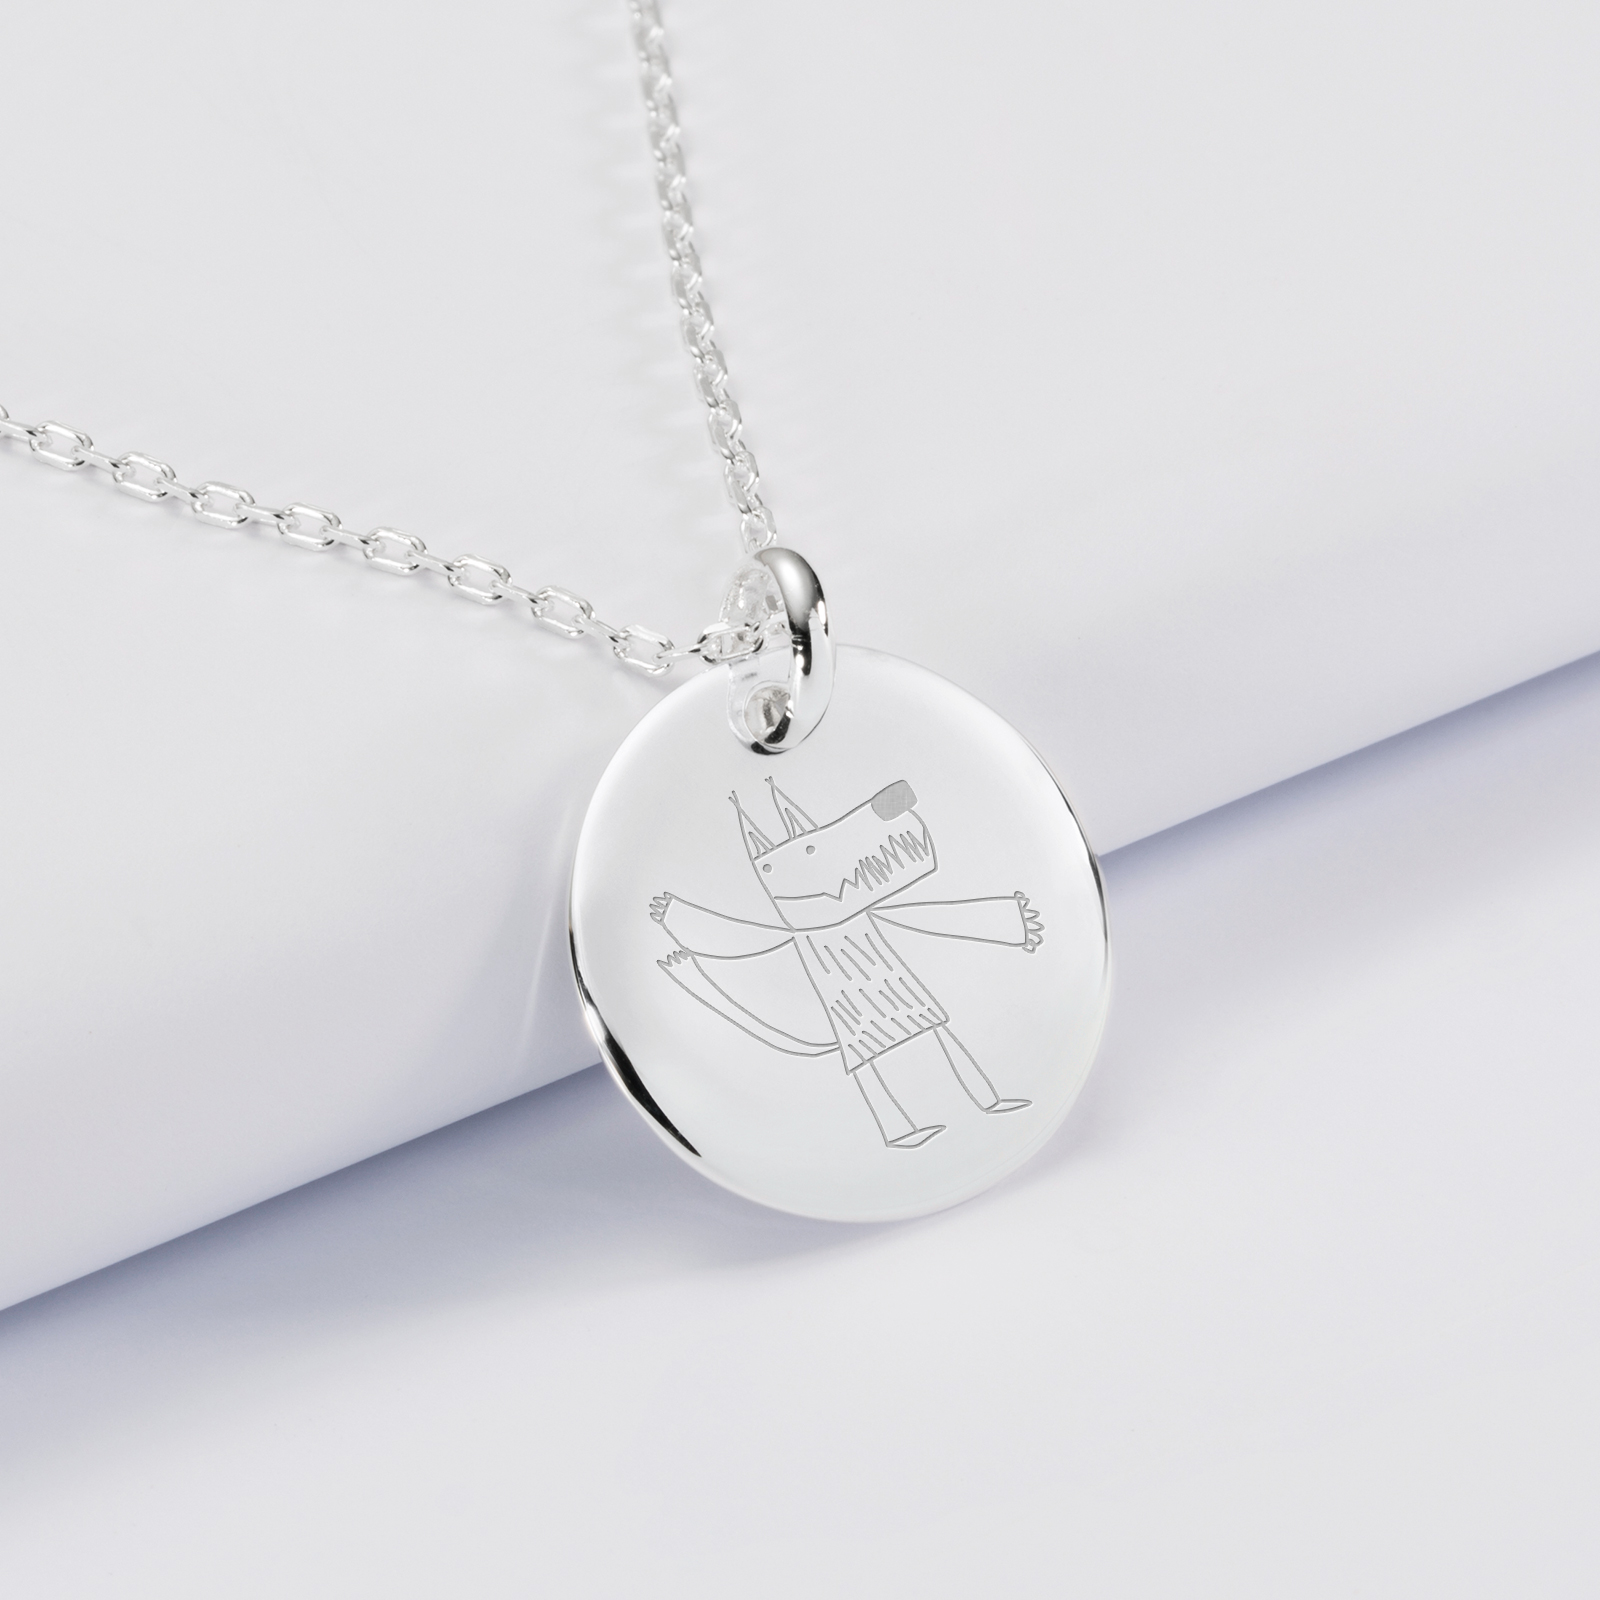 Personalised engraved gents rounded silver medallion pendant 20mm - sketch